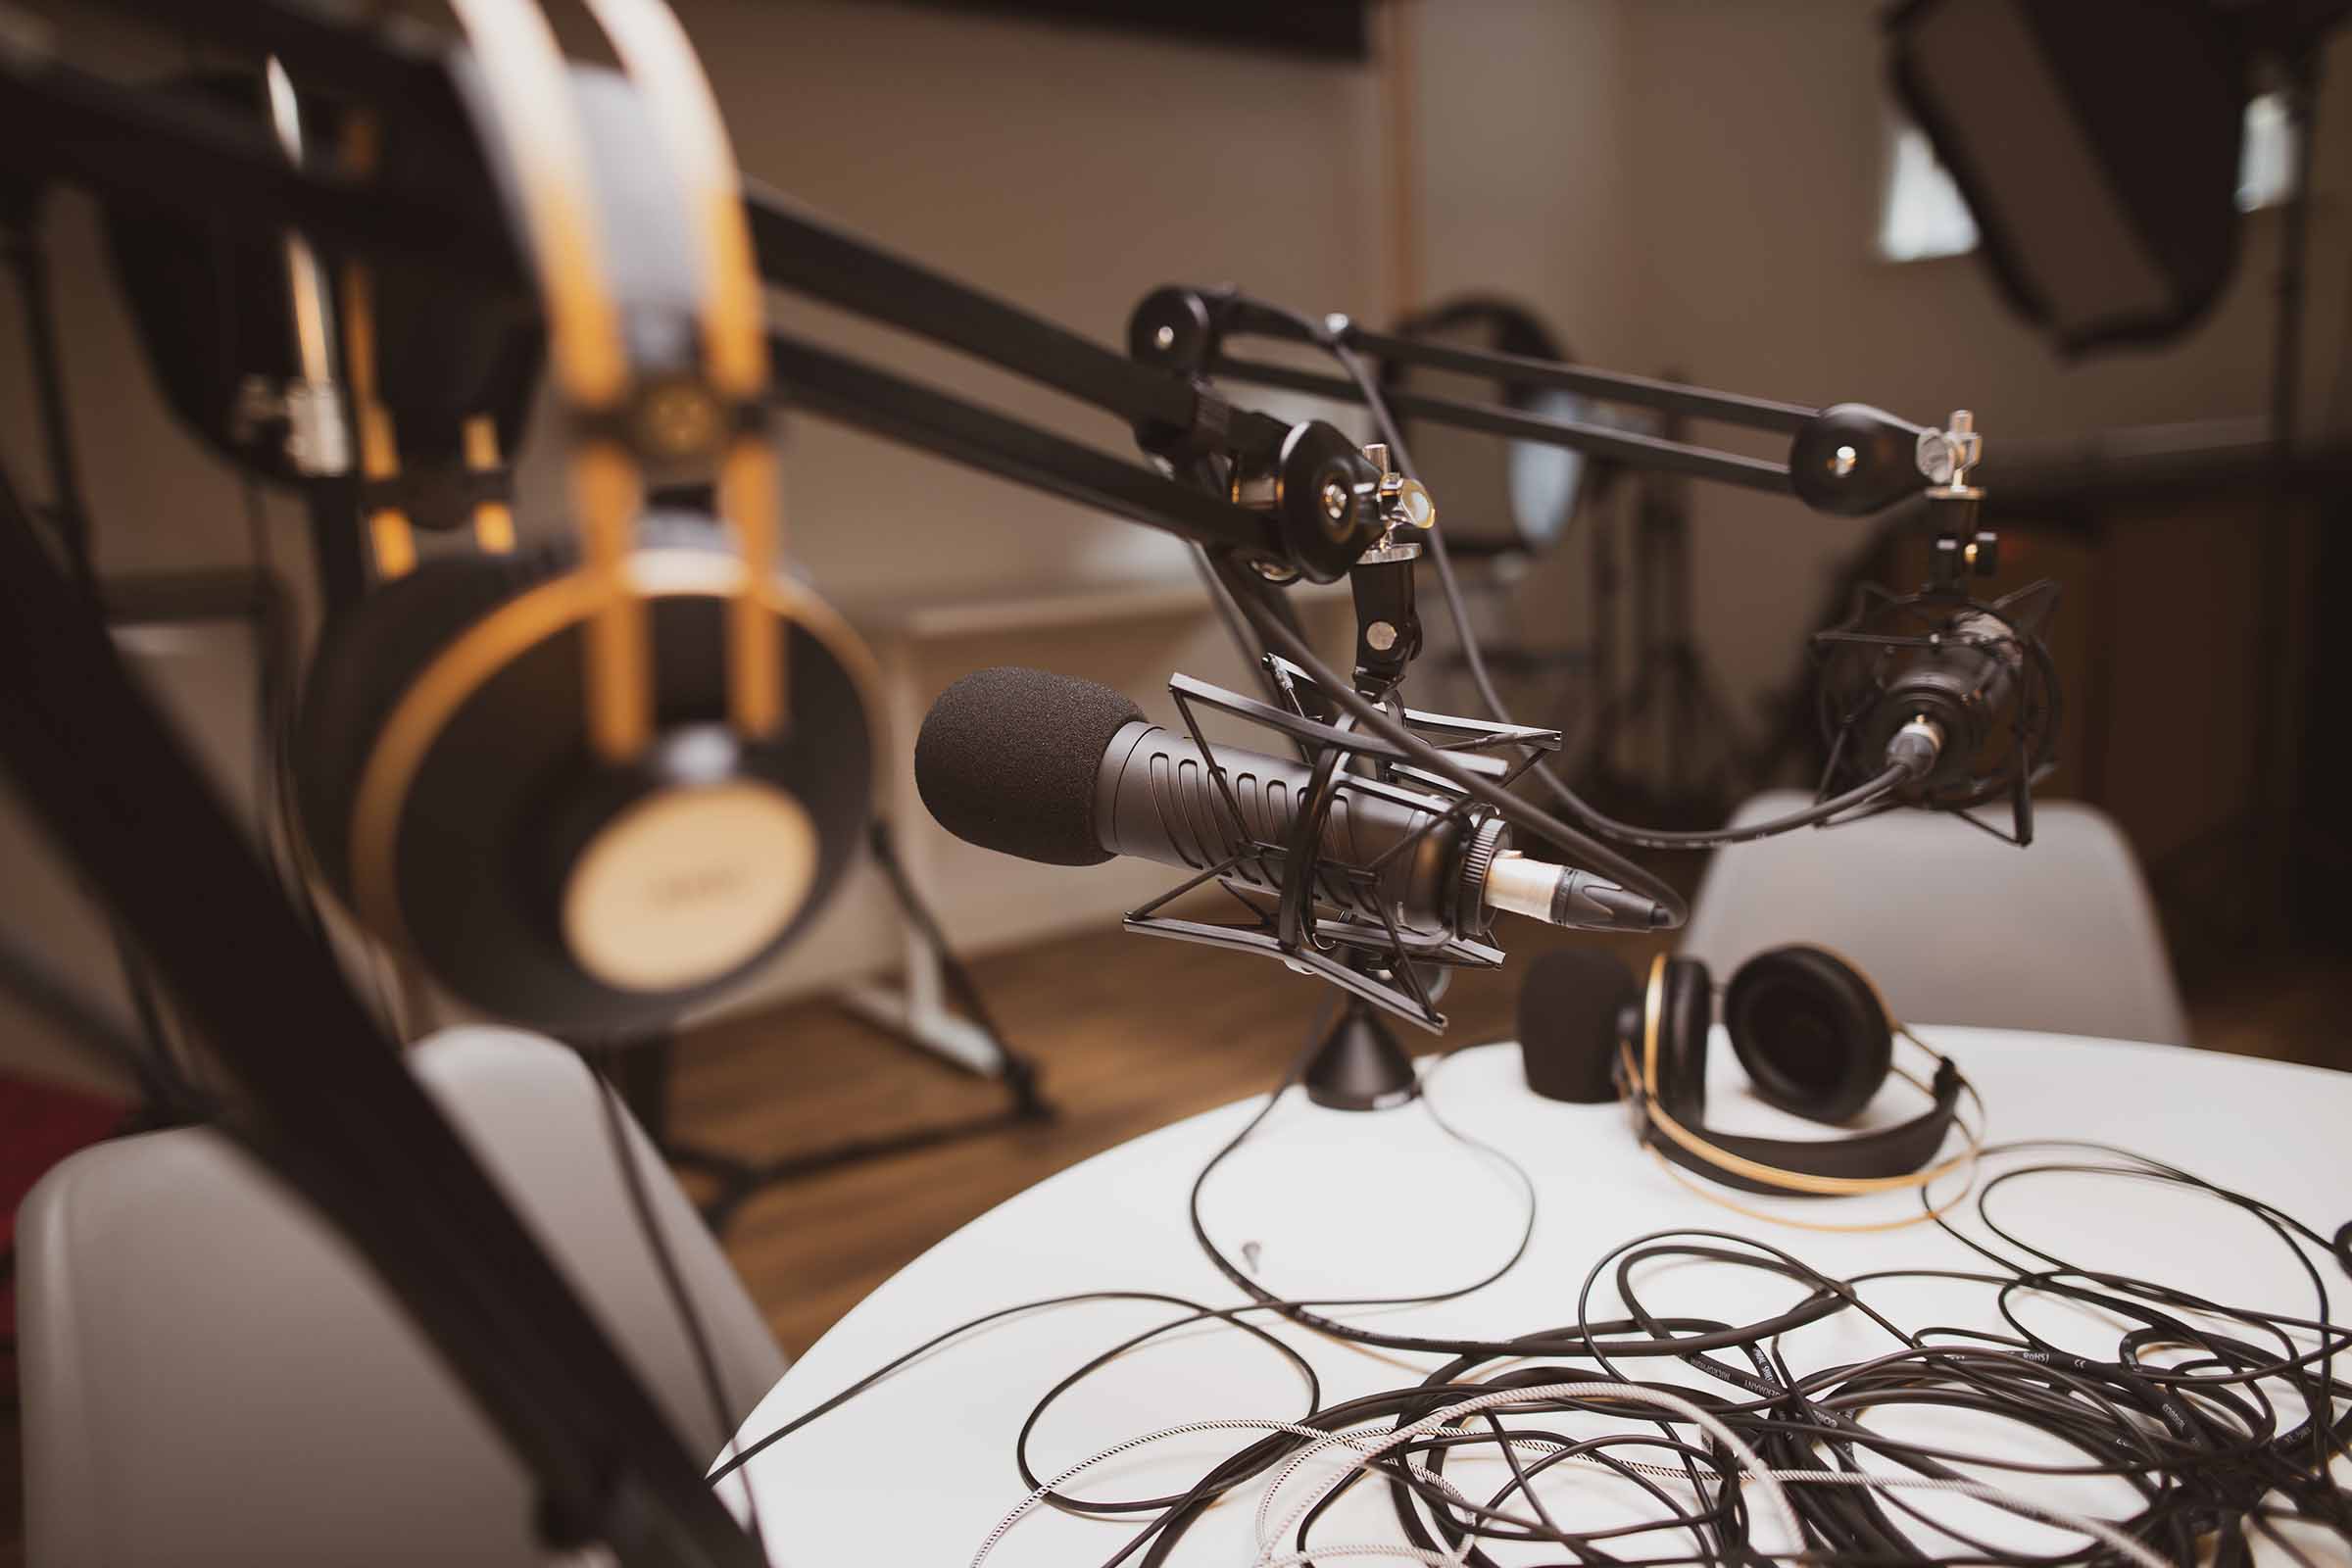 A podcast production style setup with microphone and headphones on a table